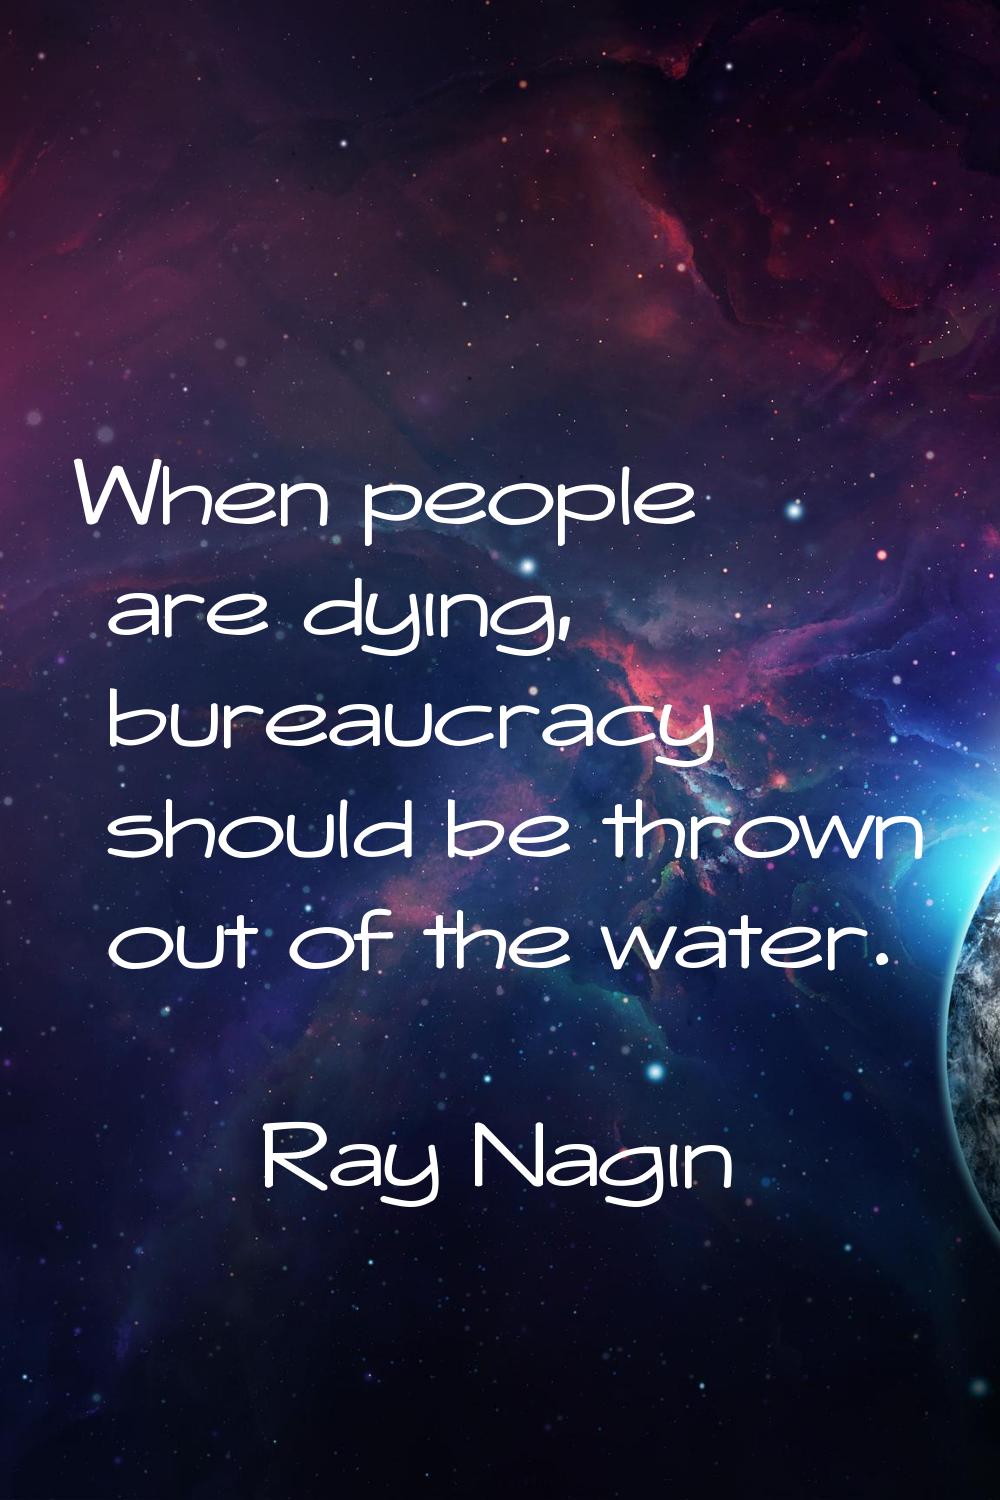 When people are dying, bureaucracy should be thrown out of the water.